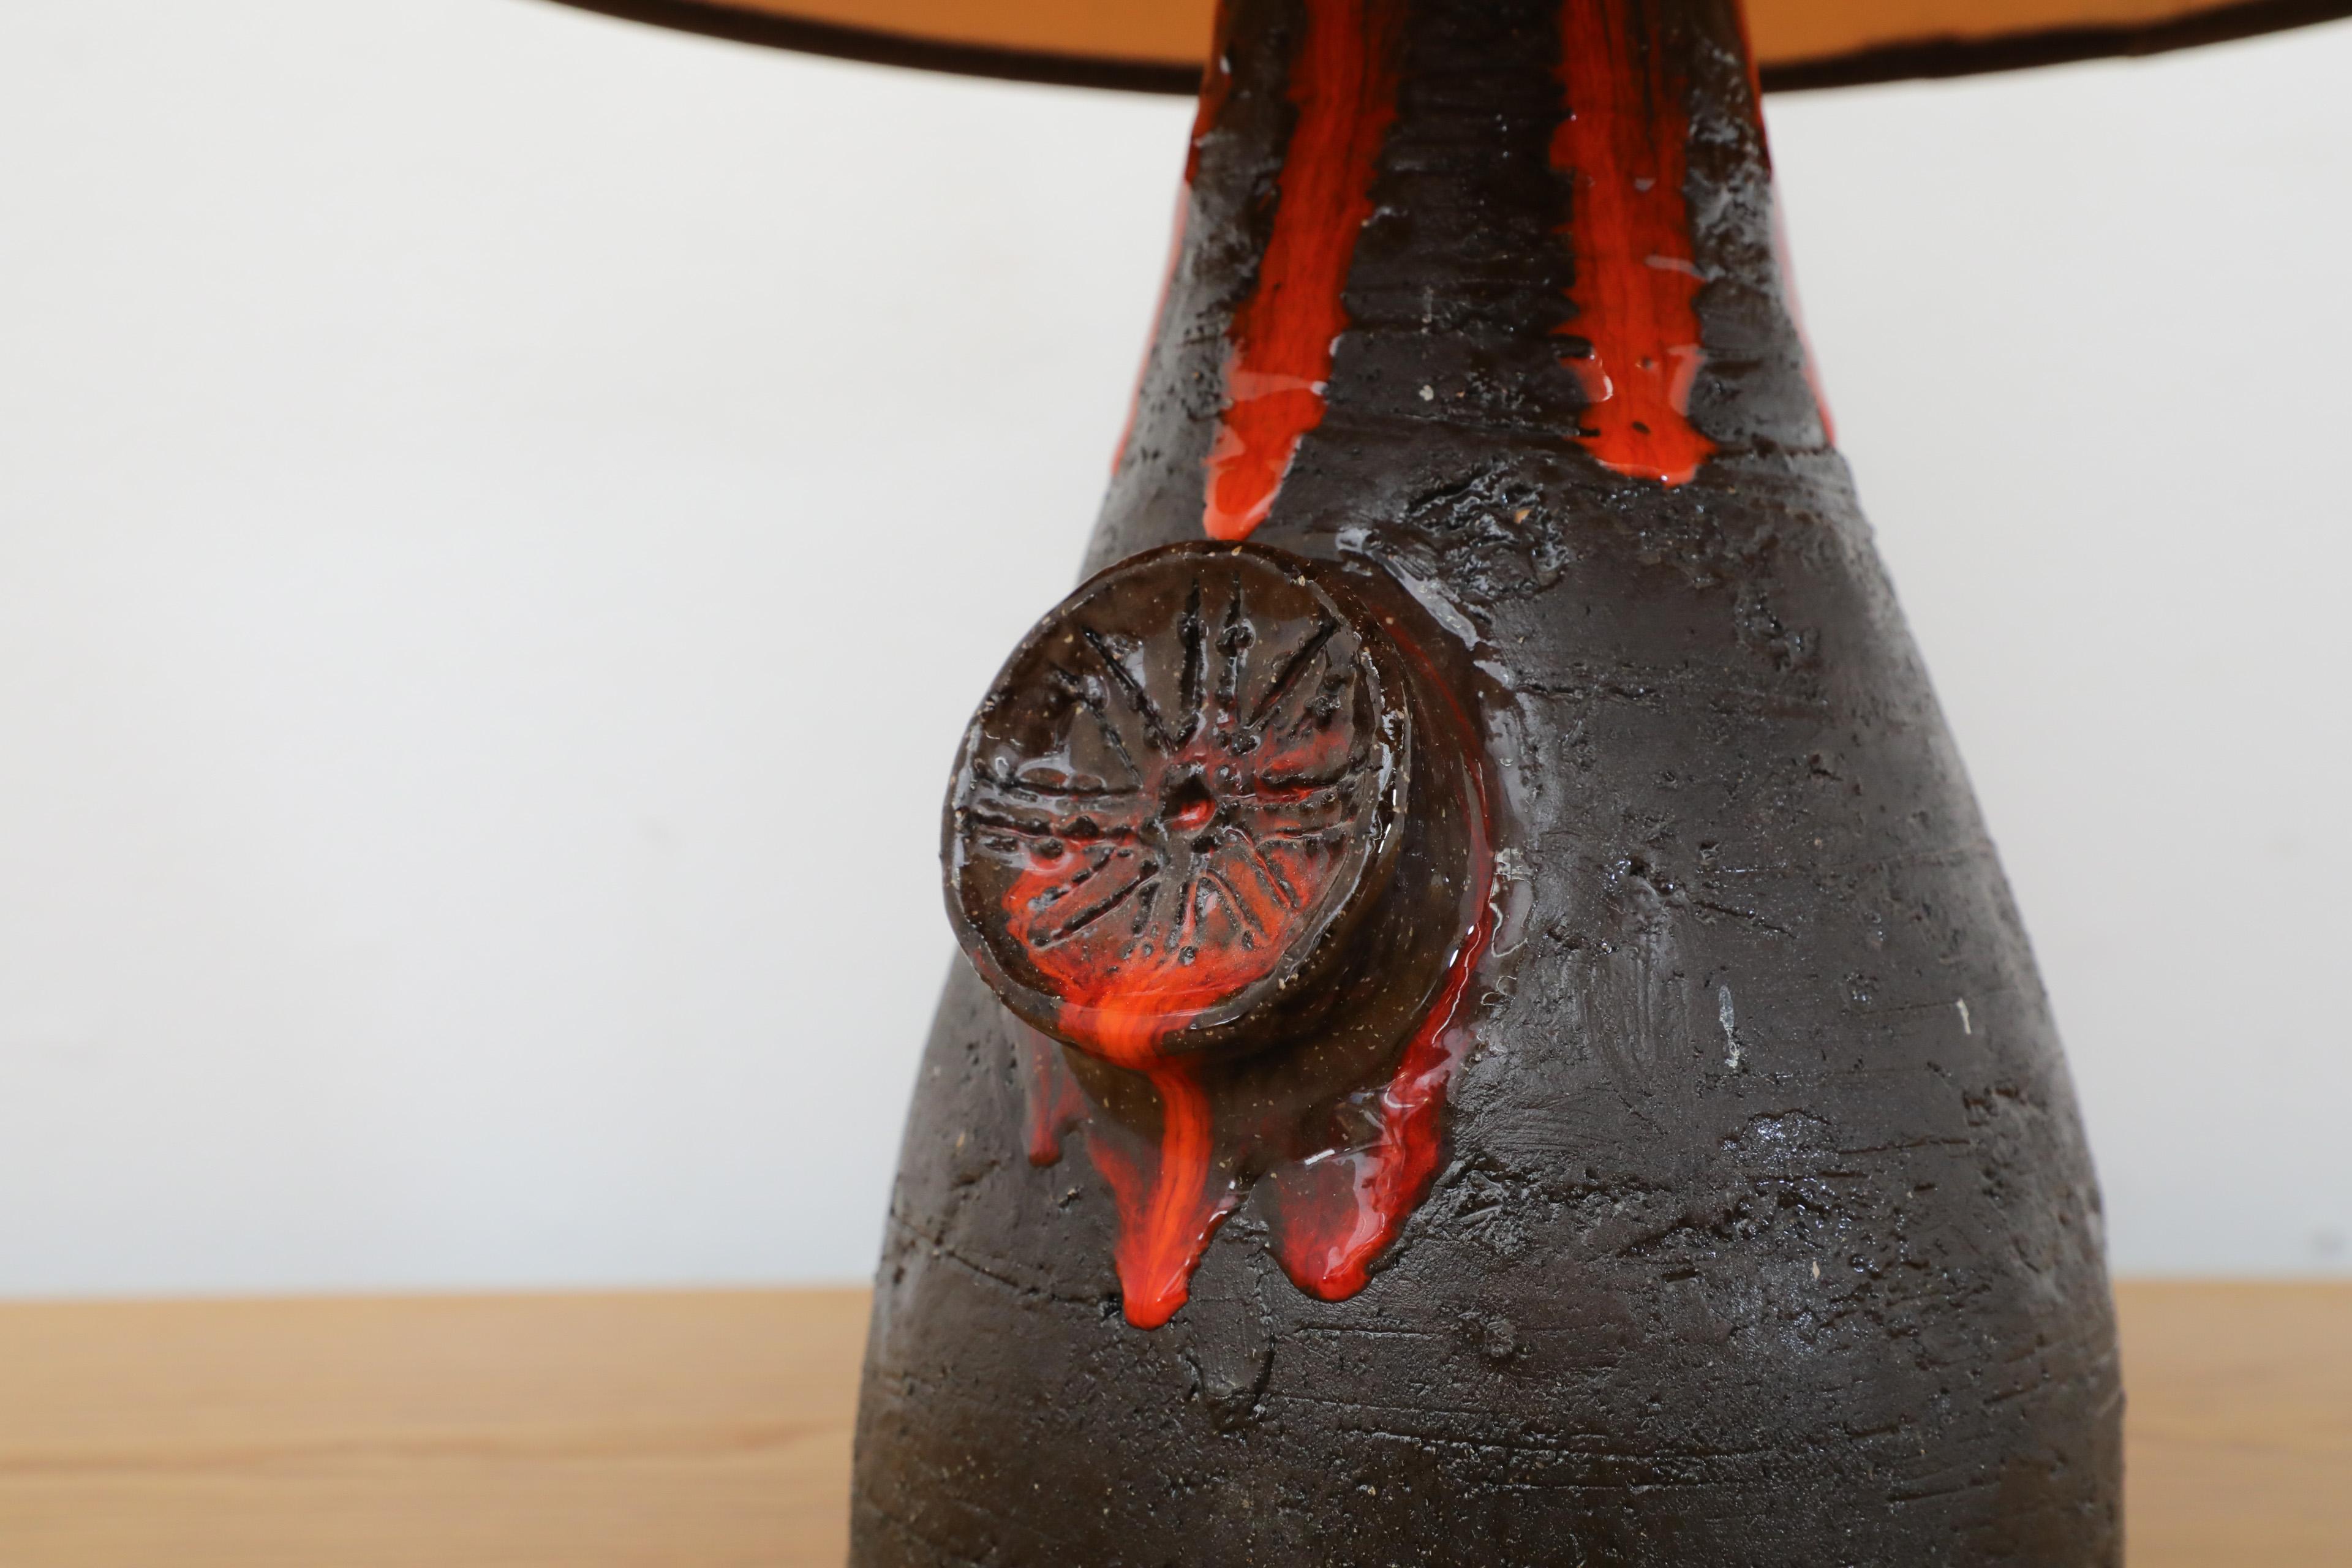 Dutch Mid-Century Black Ceramic Volcanic Table Lamp w/ Red Dripping Effect Glaze For Sale 9